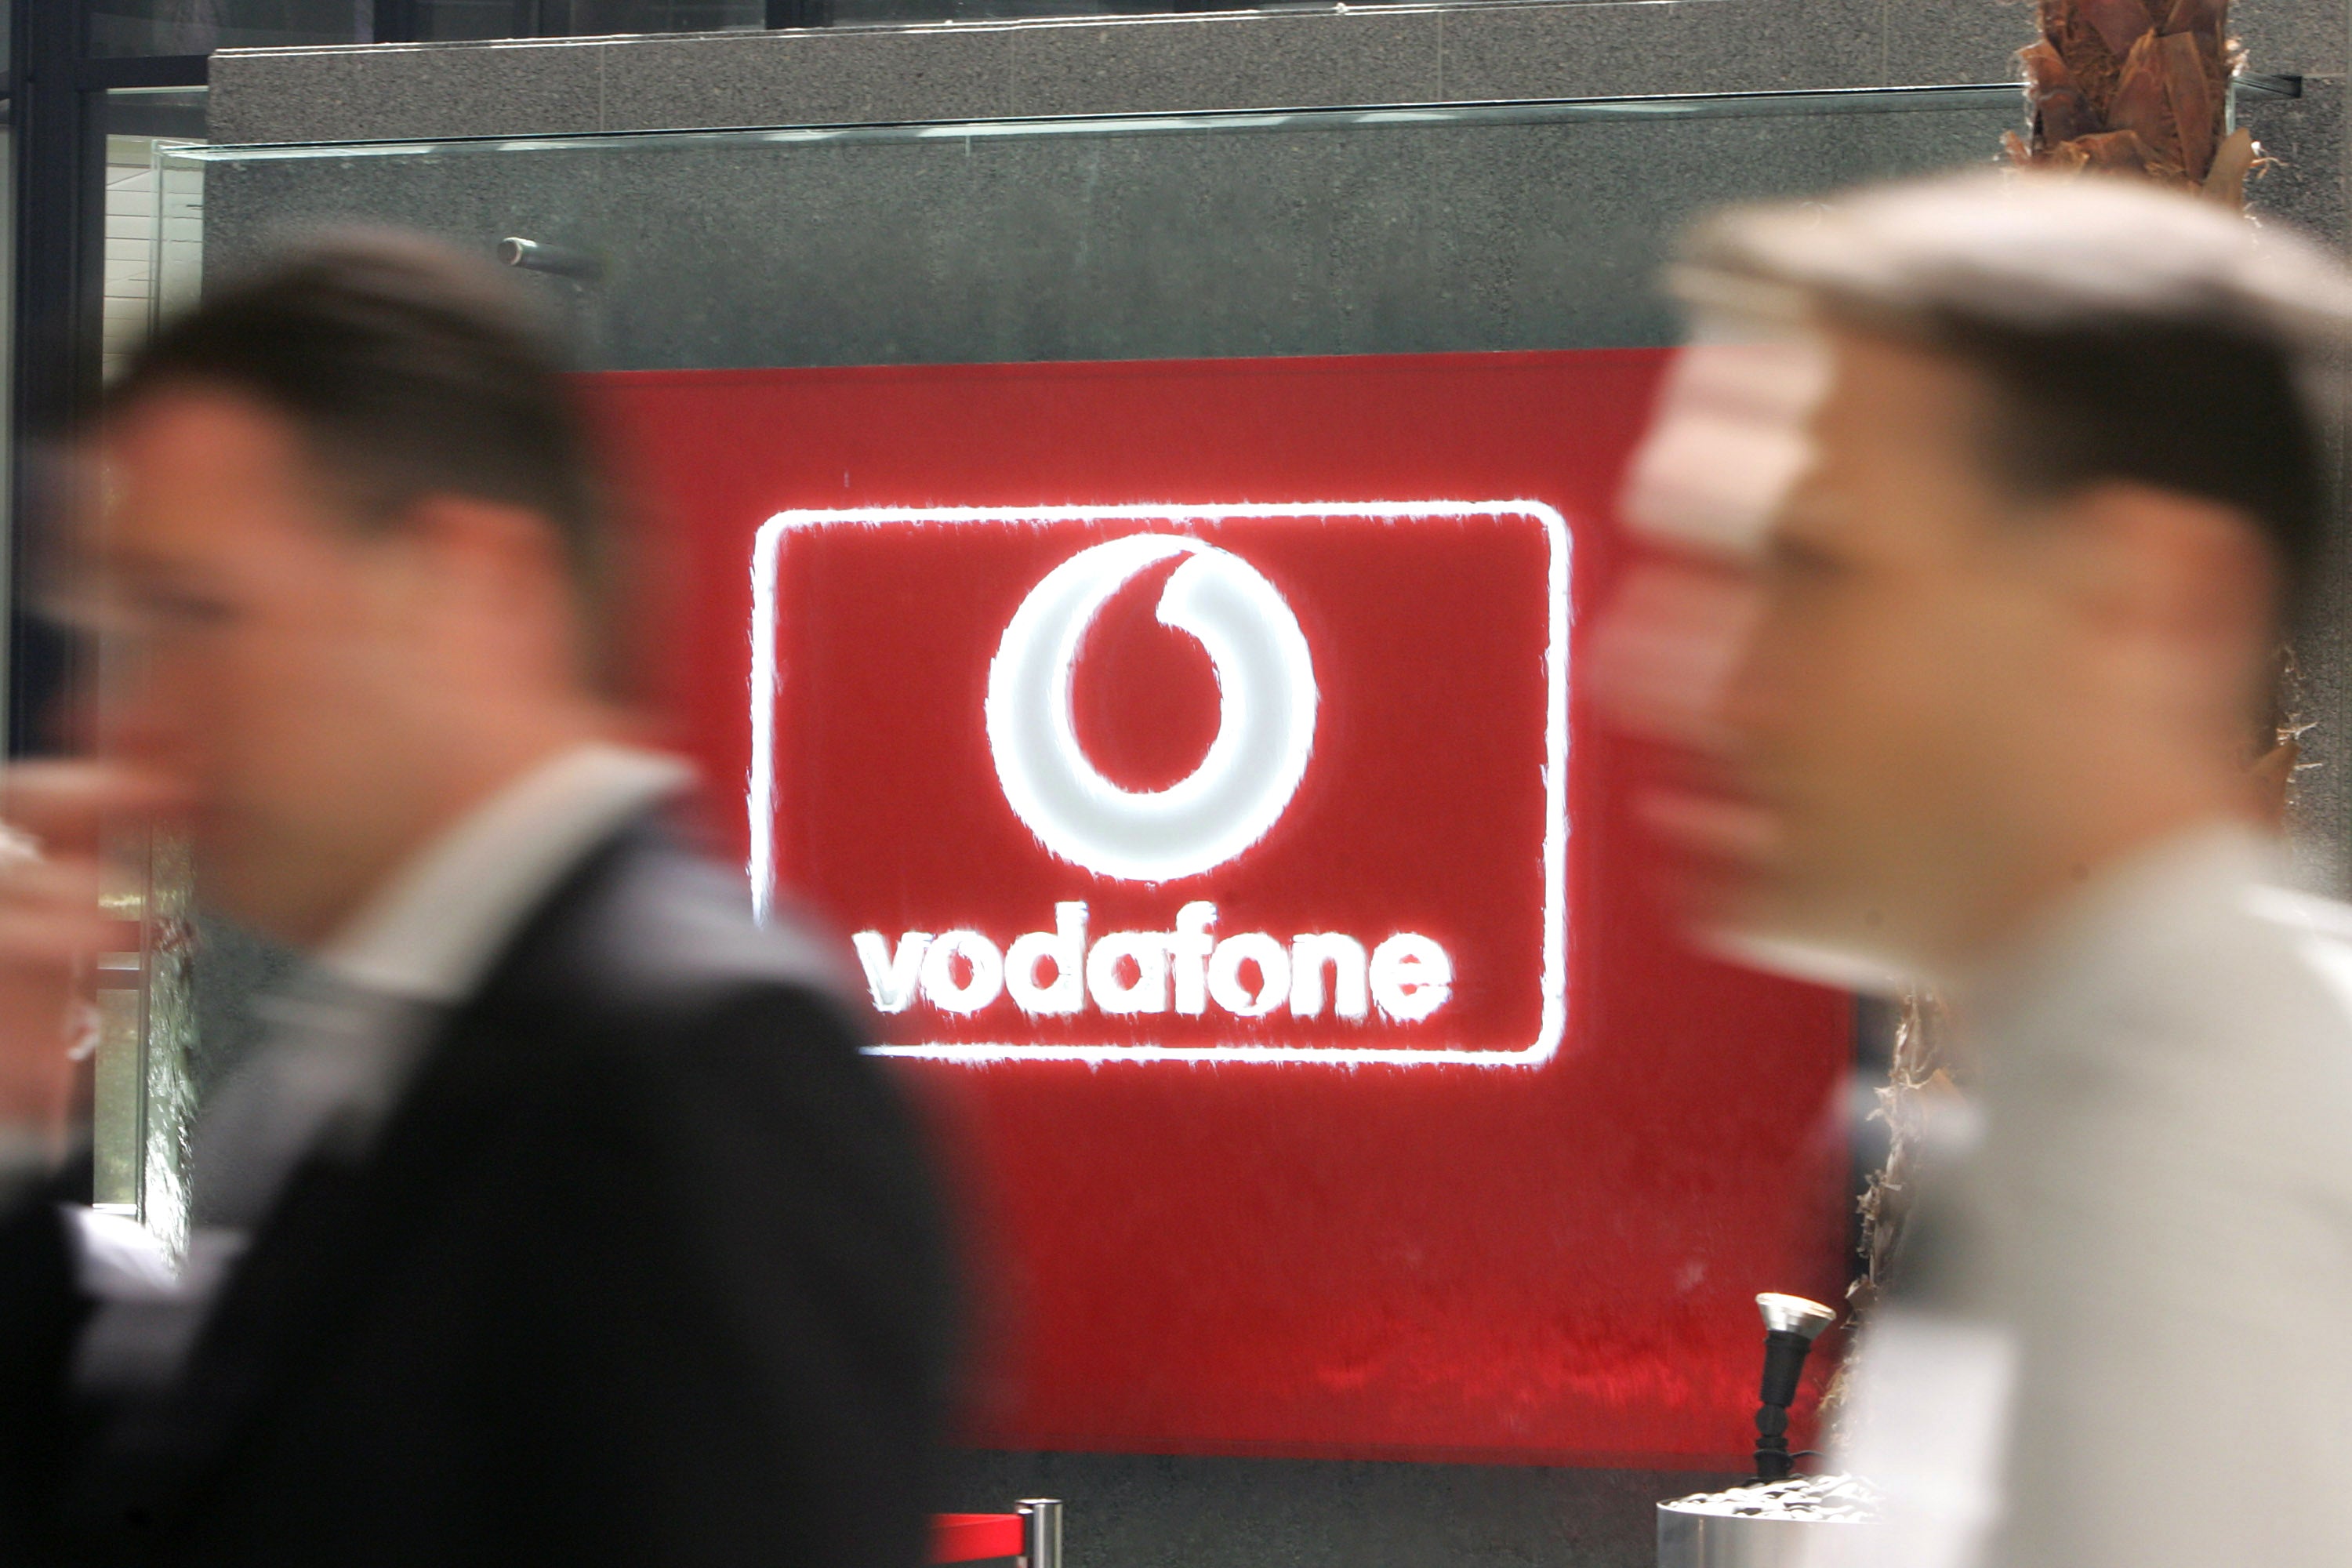 Vodafone and Three announced last month that they would merge and create one of Europe’s largest 5G networks